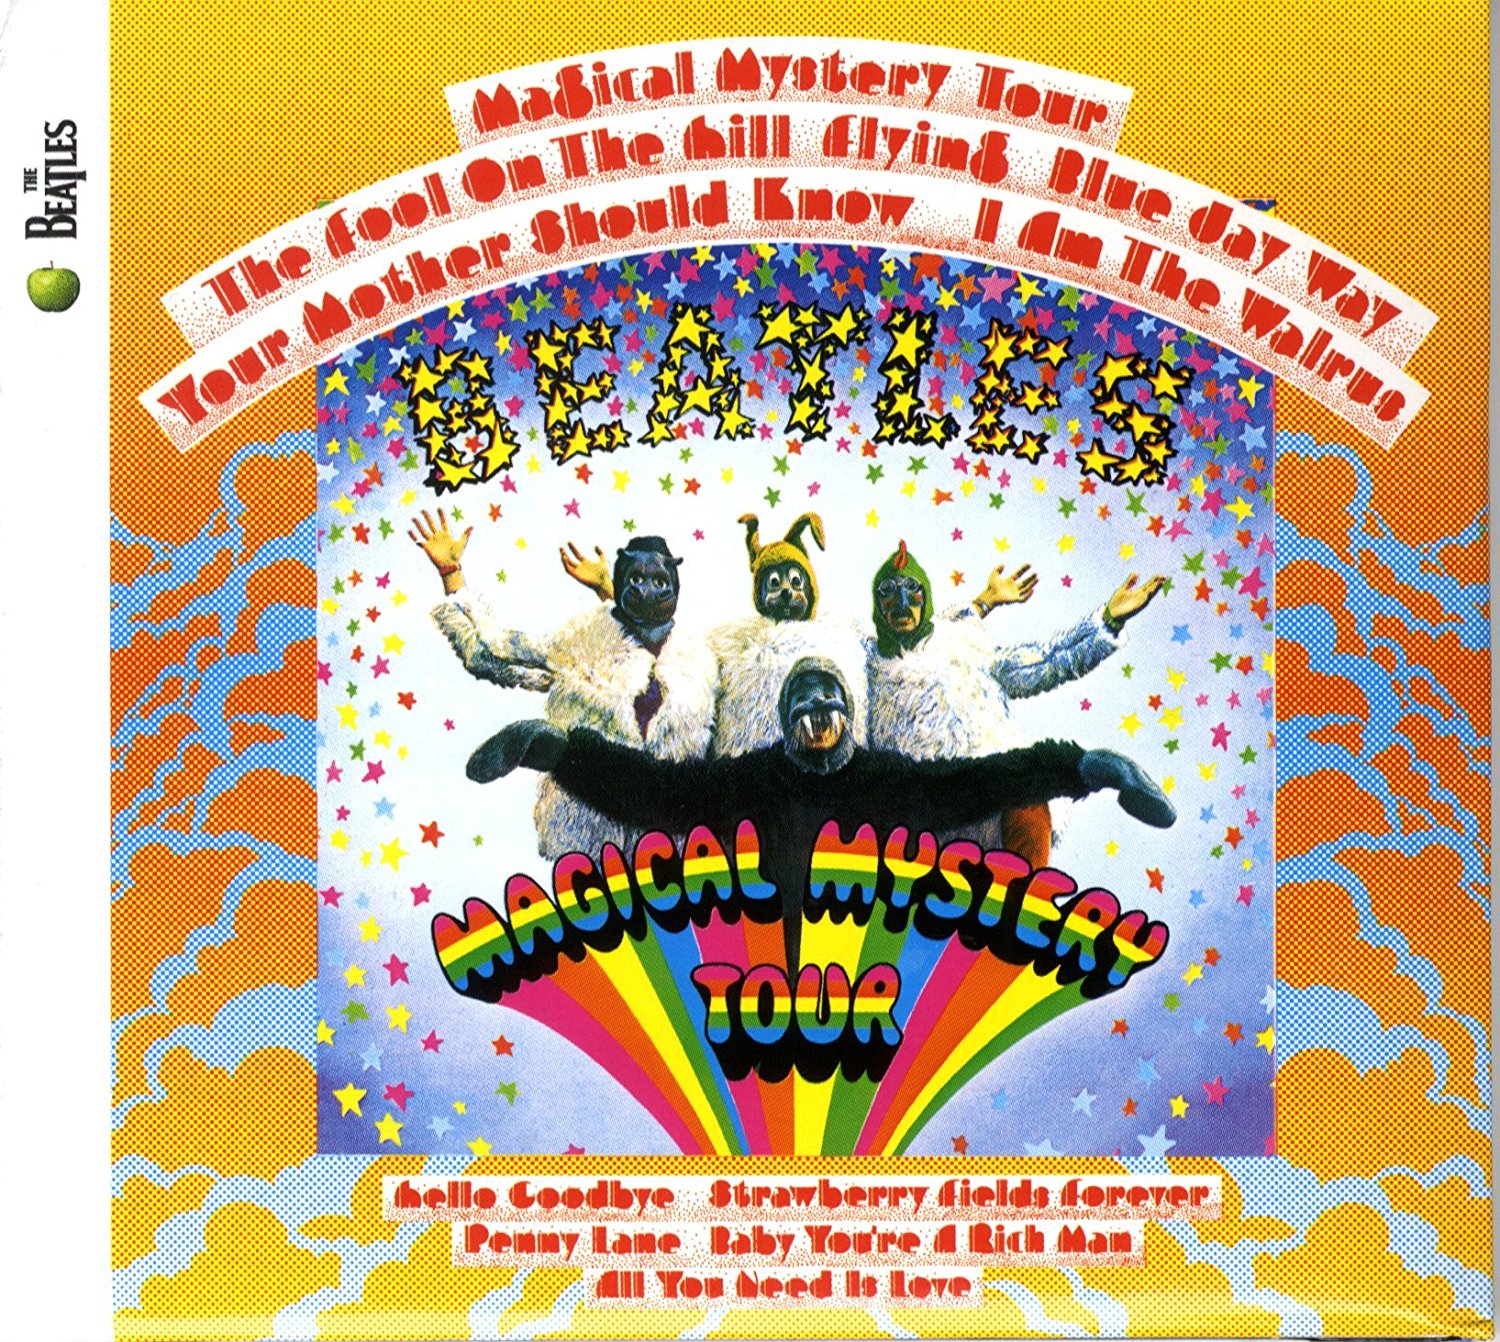 "Magical Mystery Tour" by the Beatles album cover. Members of the band are in various costumes against a primary blue-white gradient background 